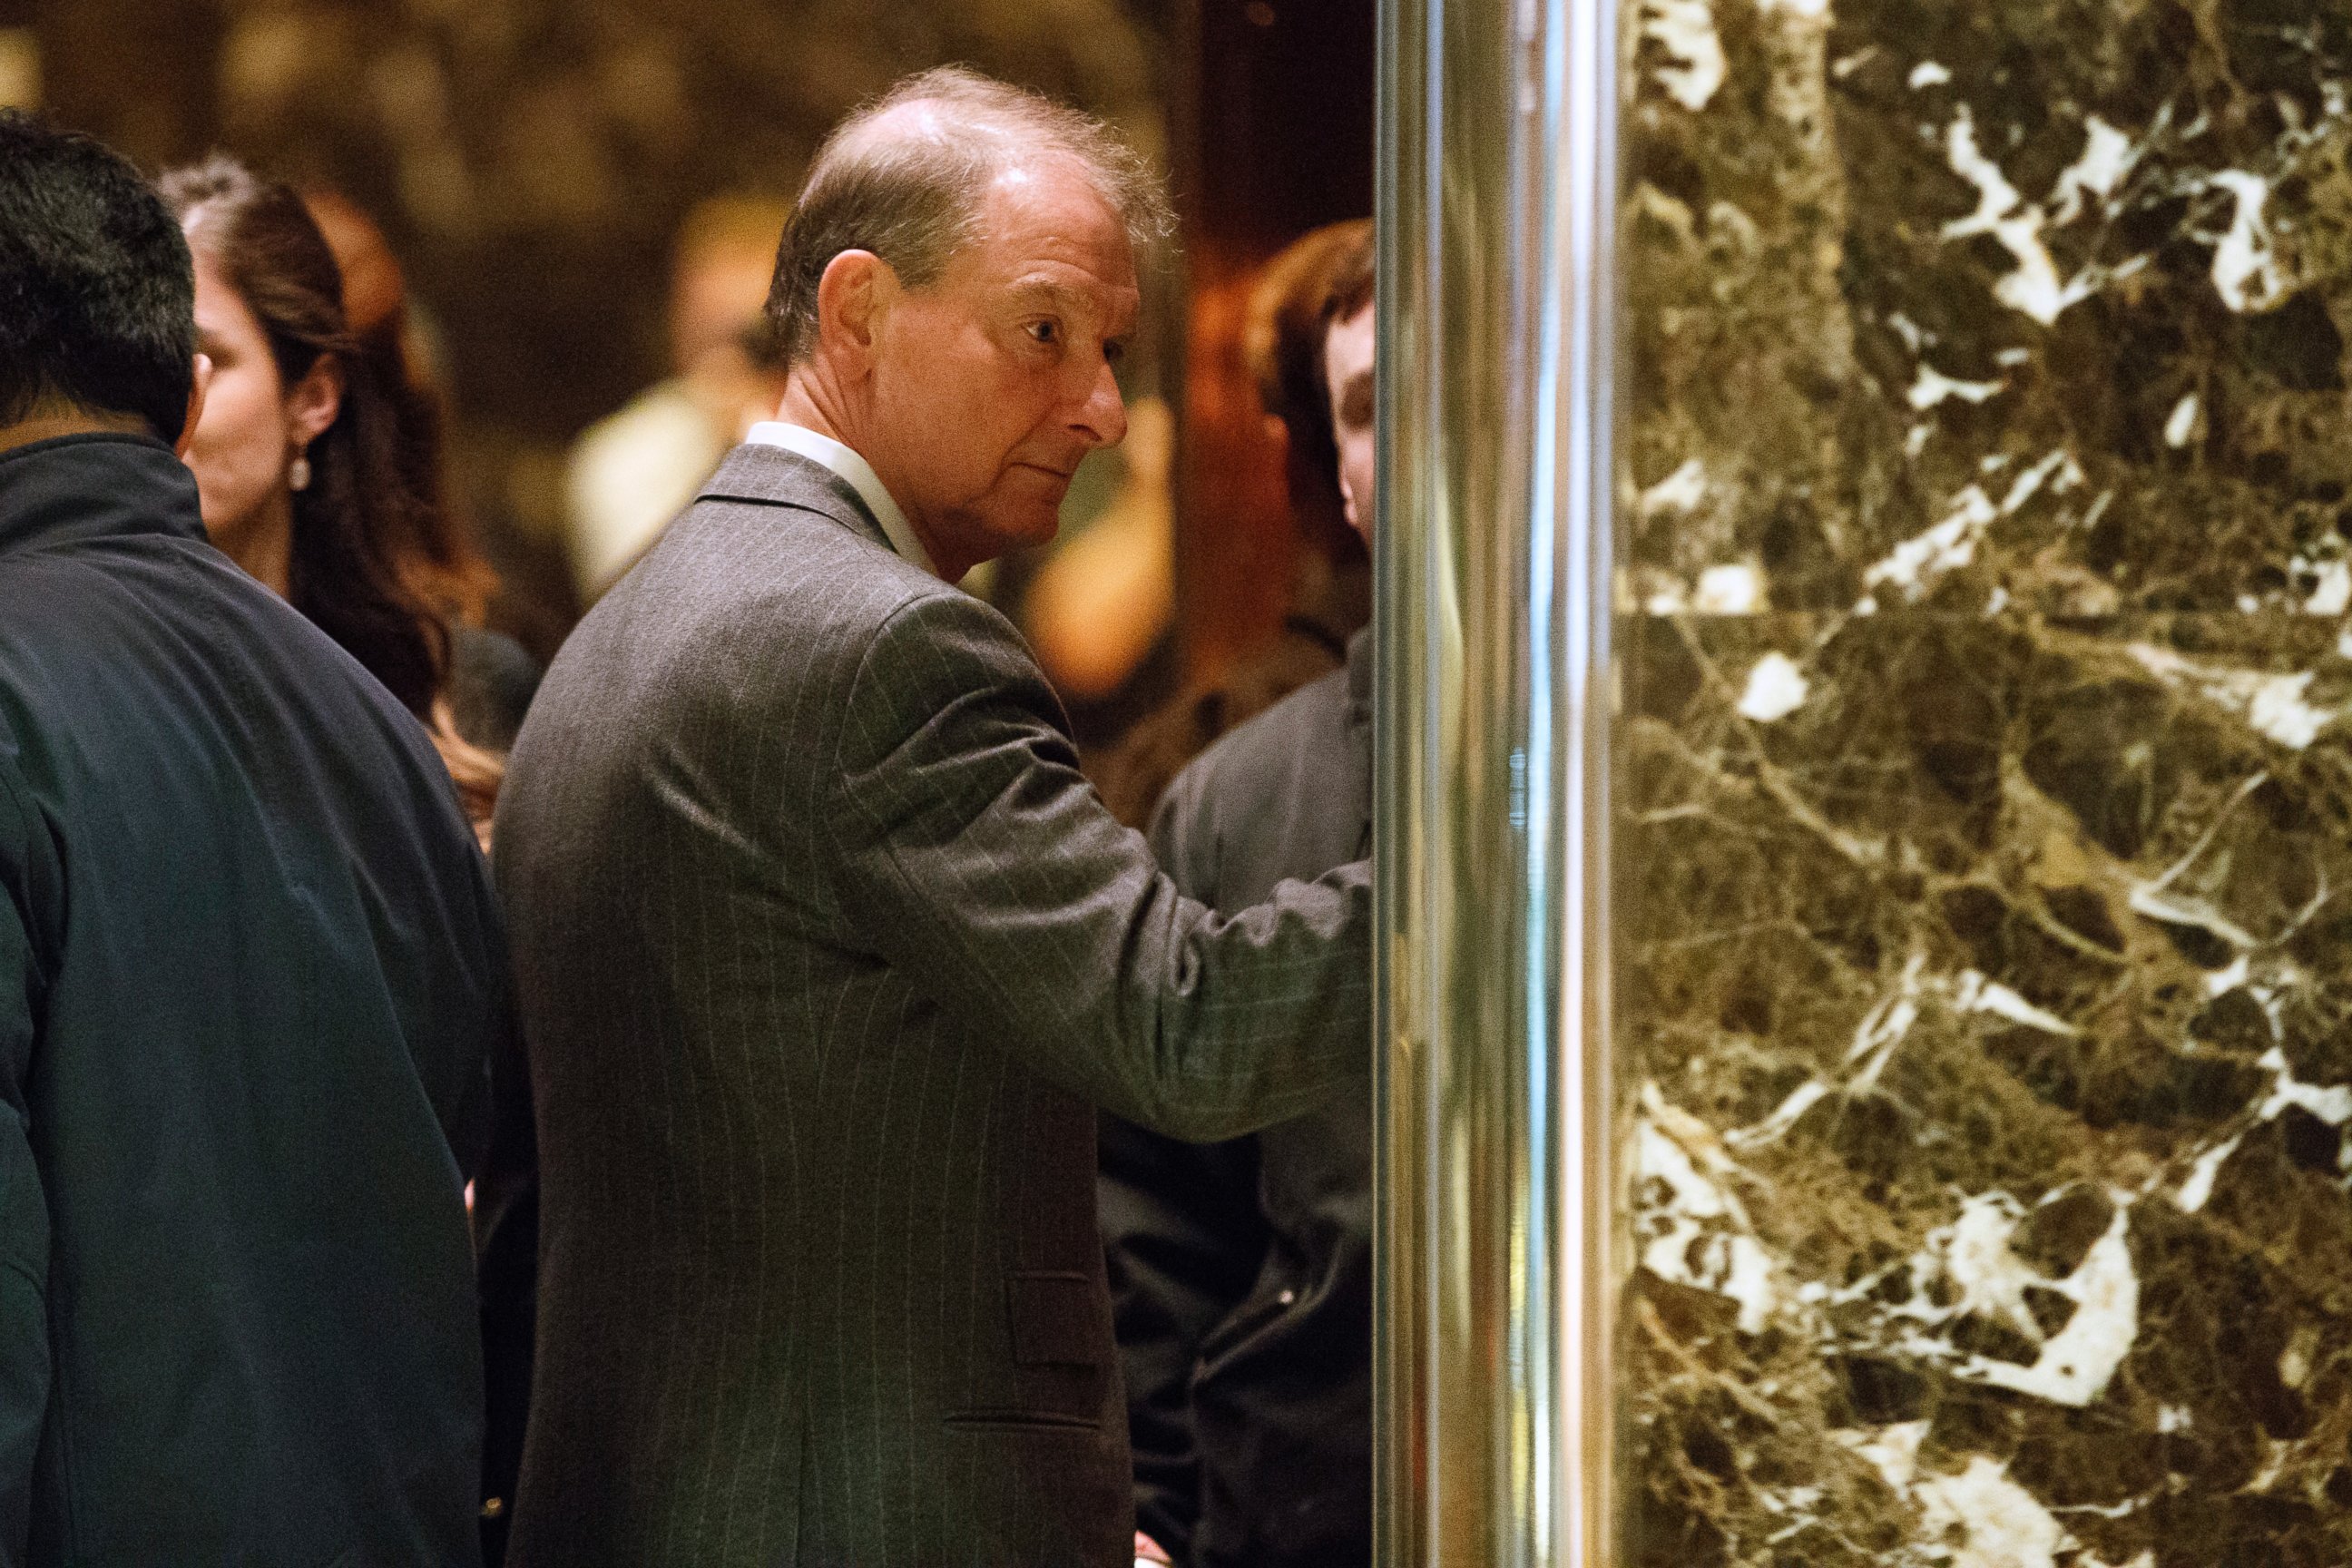 PHOTO: Paul Atkins, a former SEC Commissioner and current CEO of Patomak Partners, arrives at Trump Tower, Nov. 28, 2016, in New York.